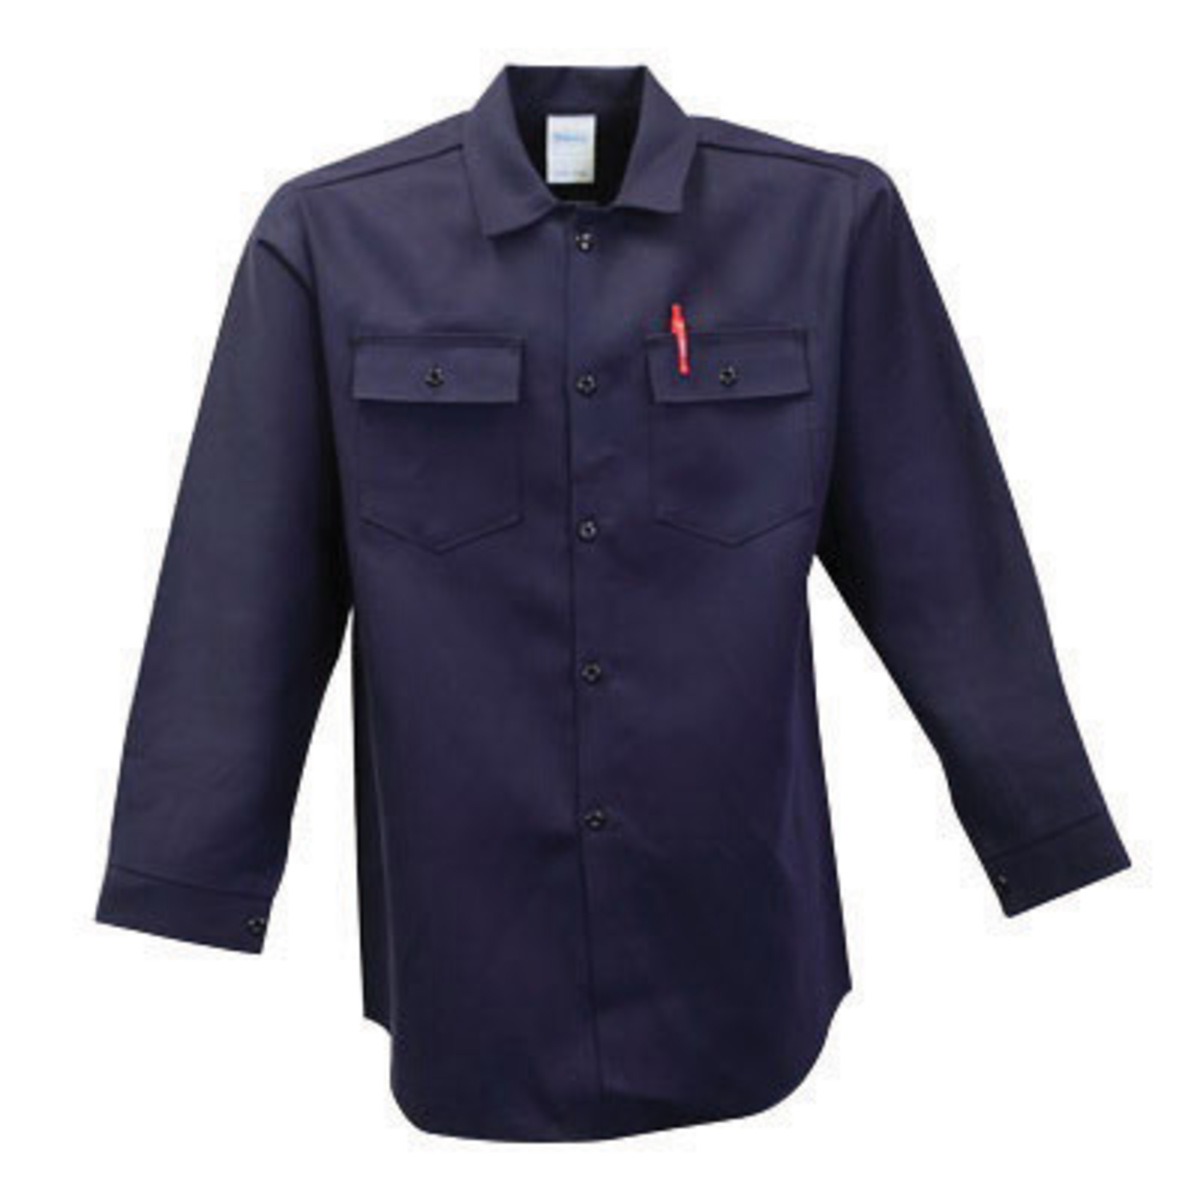 Stanco Safety Products™ Large Navy Blue Indura® Arc Rated Flame Resistant Work Shirt With Button Closure